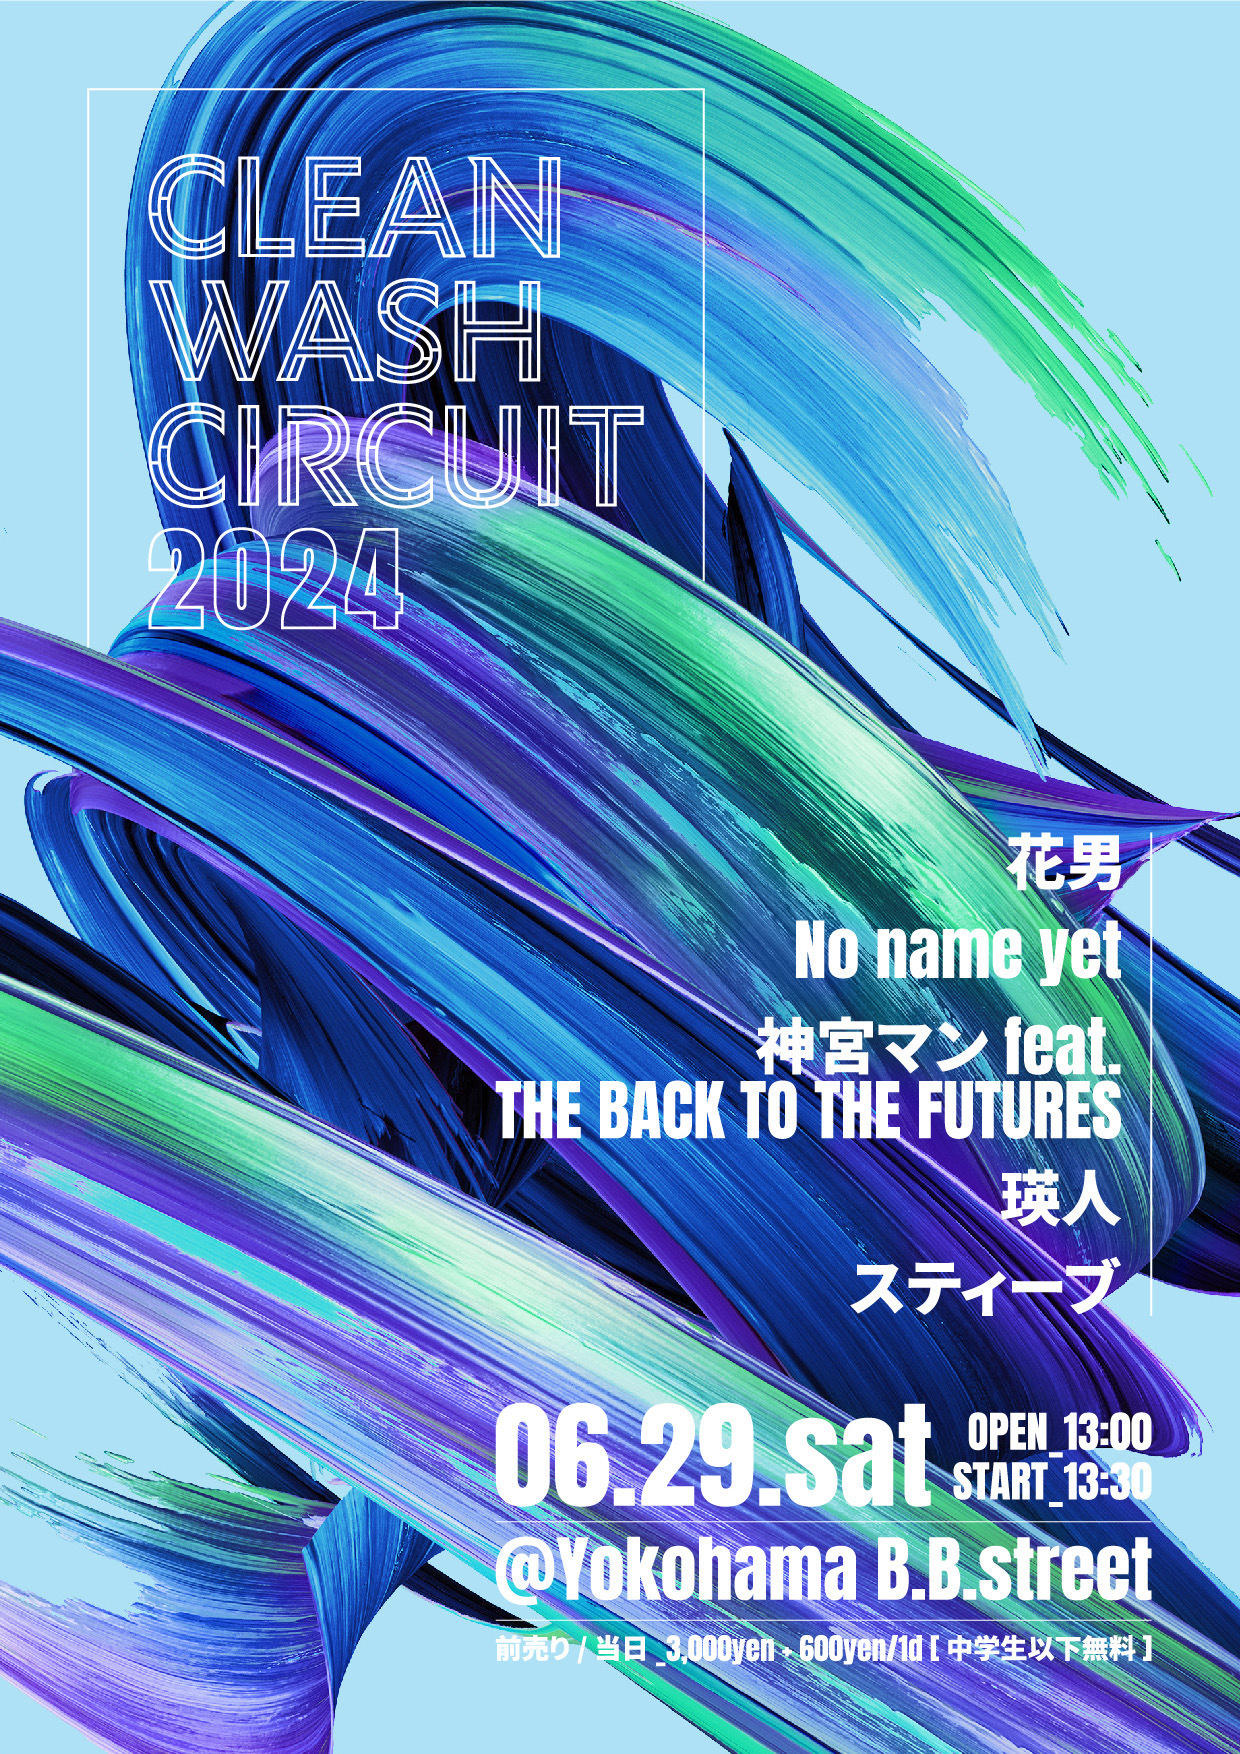 CLEAN WASH CIRCUIT」 | 瑛人 official website